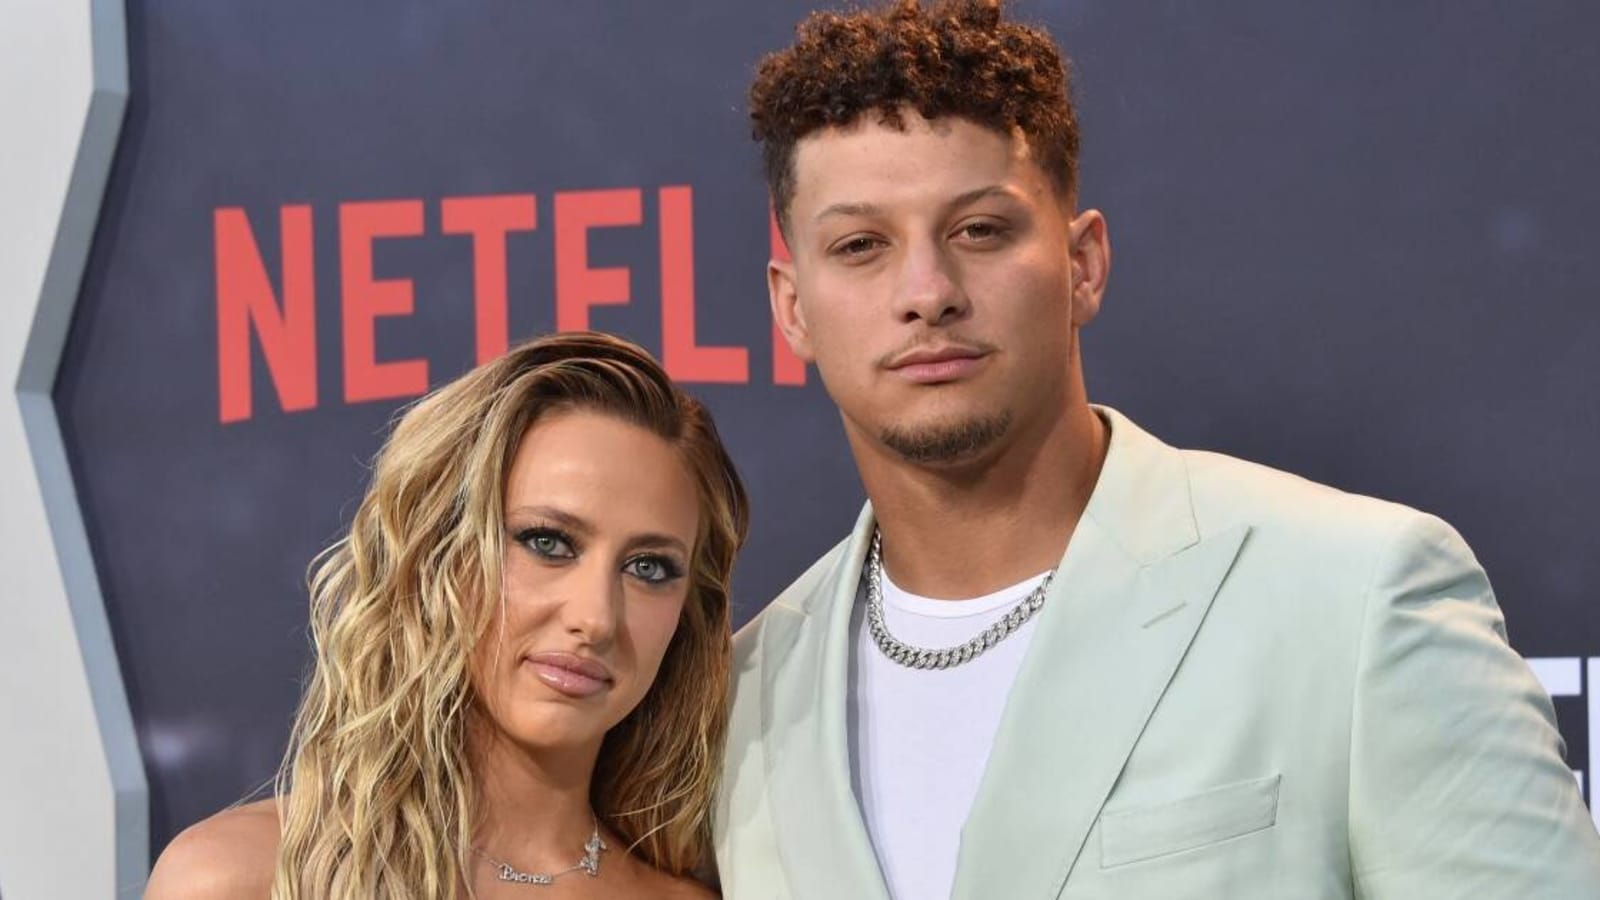 Brittany Mahomes roasts husband Patrick over offseason diet